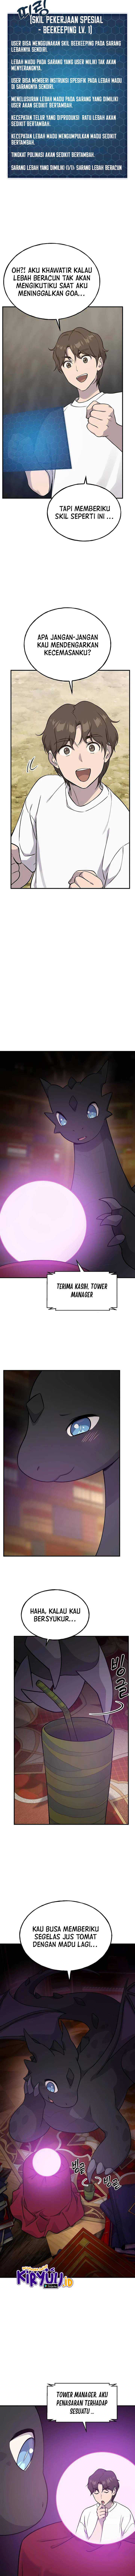 Solo Farming In The Tower Chapter 17